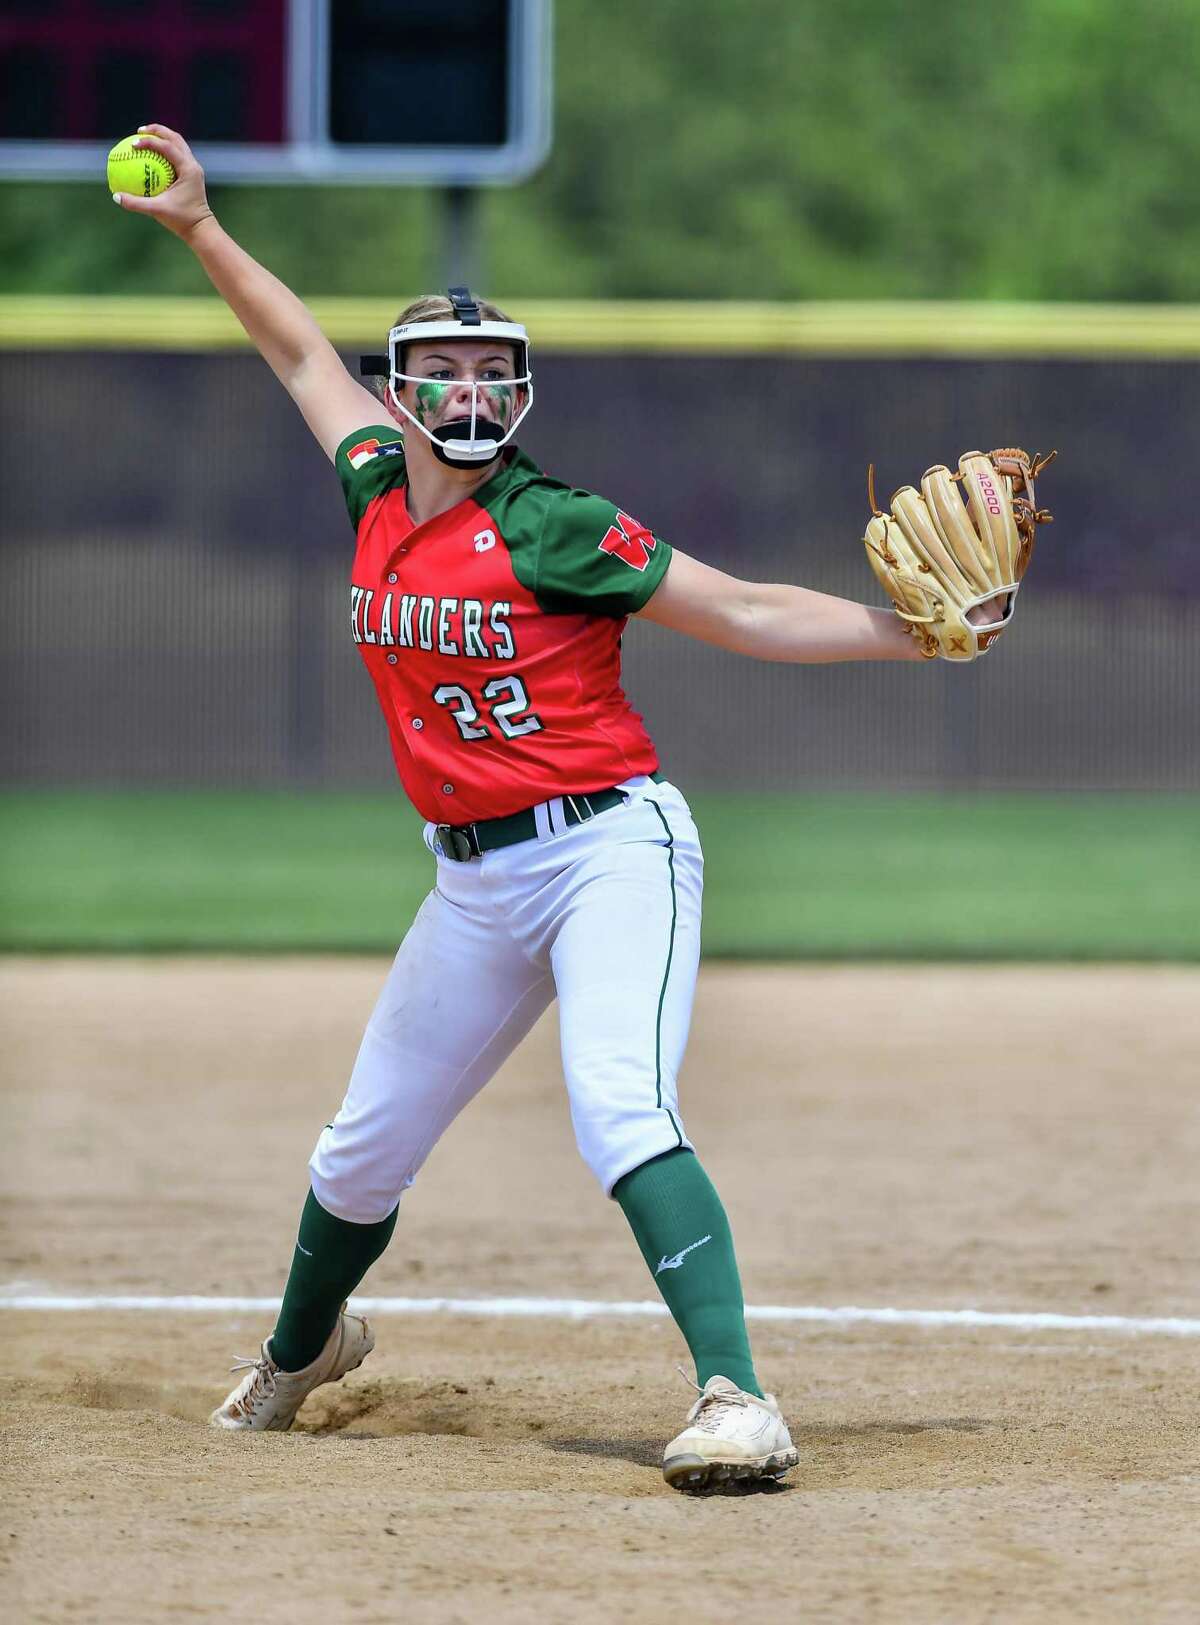 Woodlands Chesney Davis (22) pitches in the sixth inning during a Region II-6A quarterfinals softball game at Magnolia High School on Saturday, May 14, 2022. Woodlands beat Grand Oaks 14-11 in 7 innings.